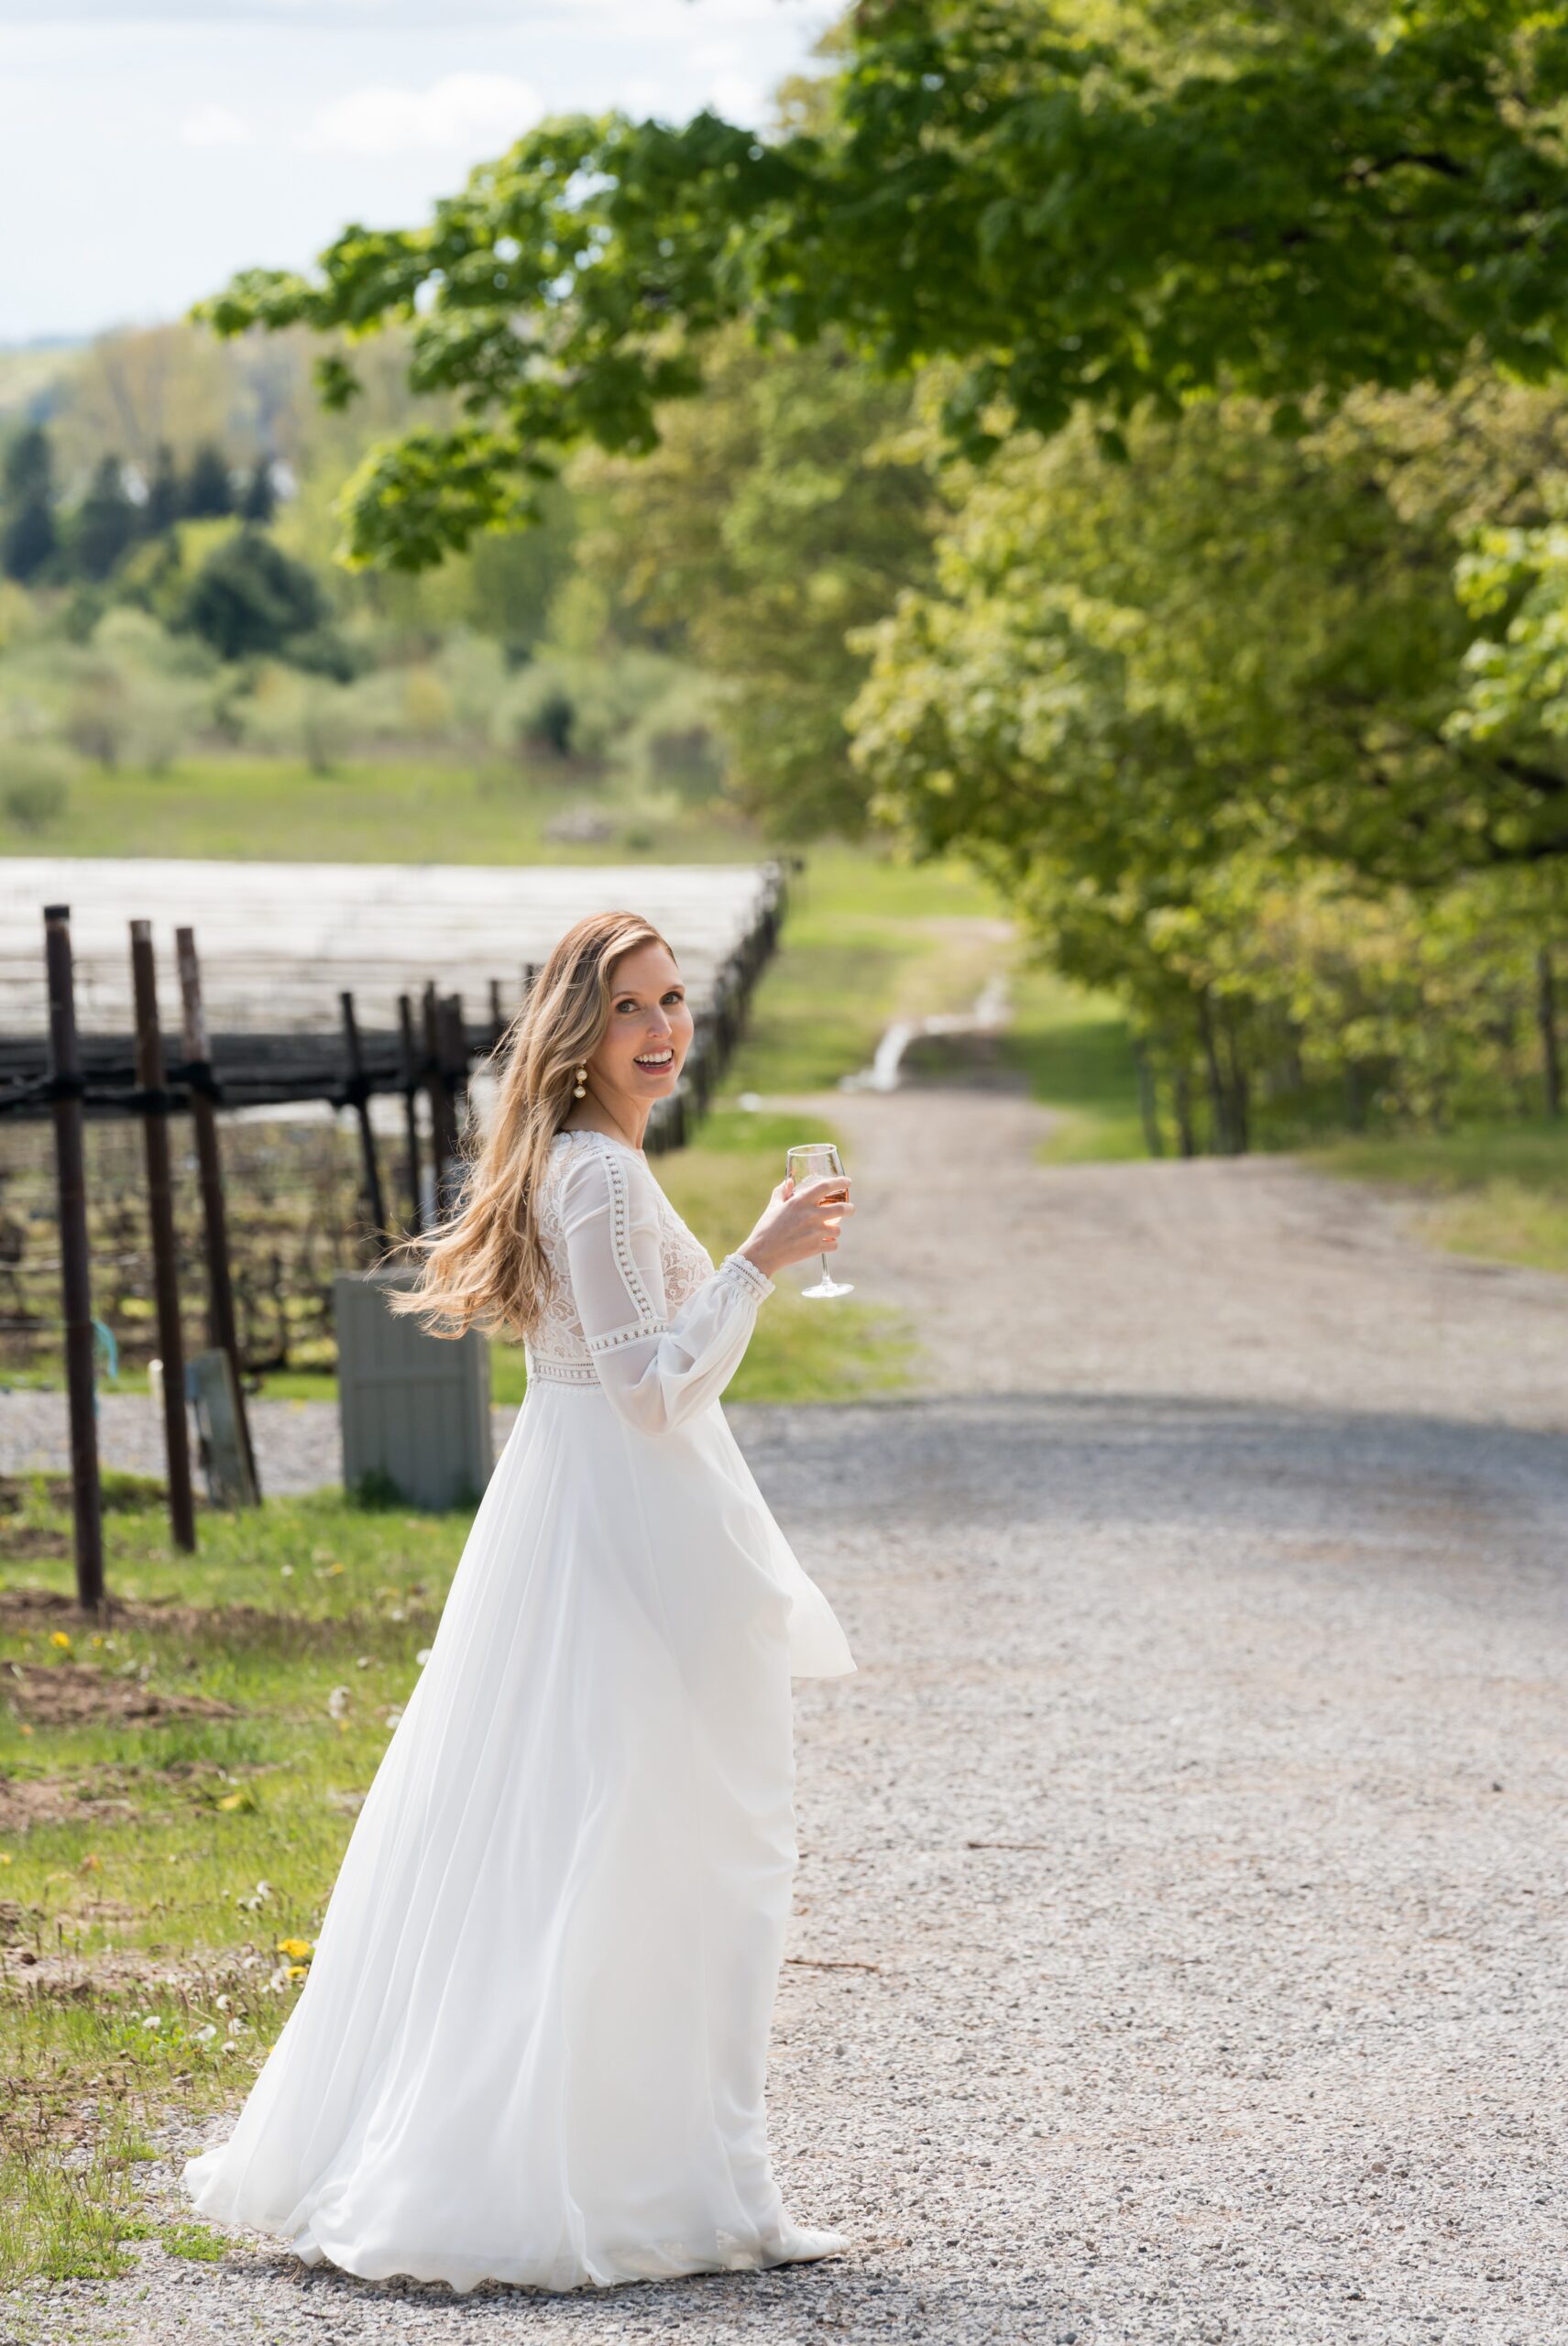 A bride walks the vineyard with wine glass in hand during Traverse City wedding.  